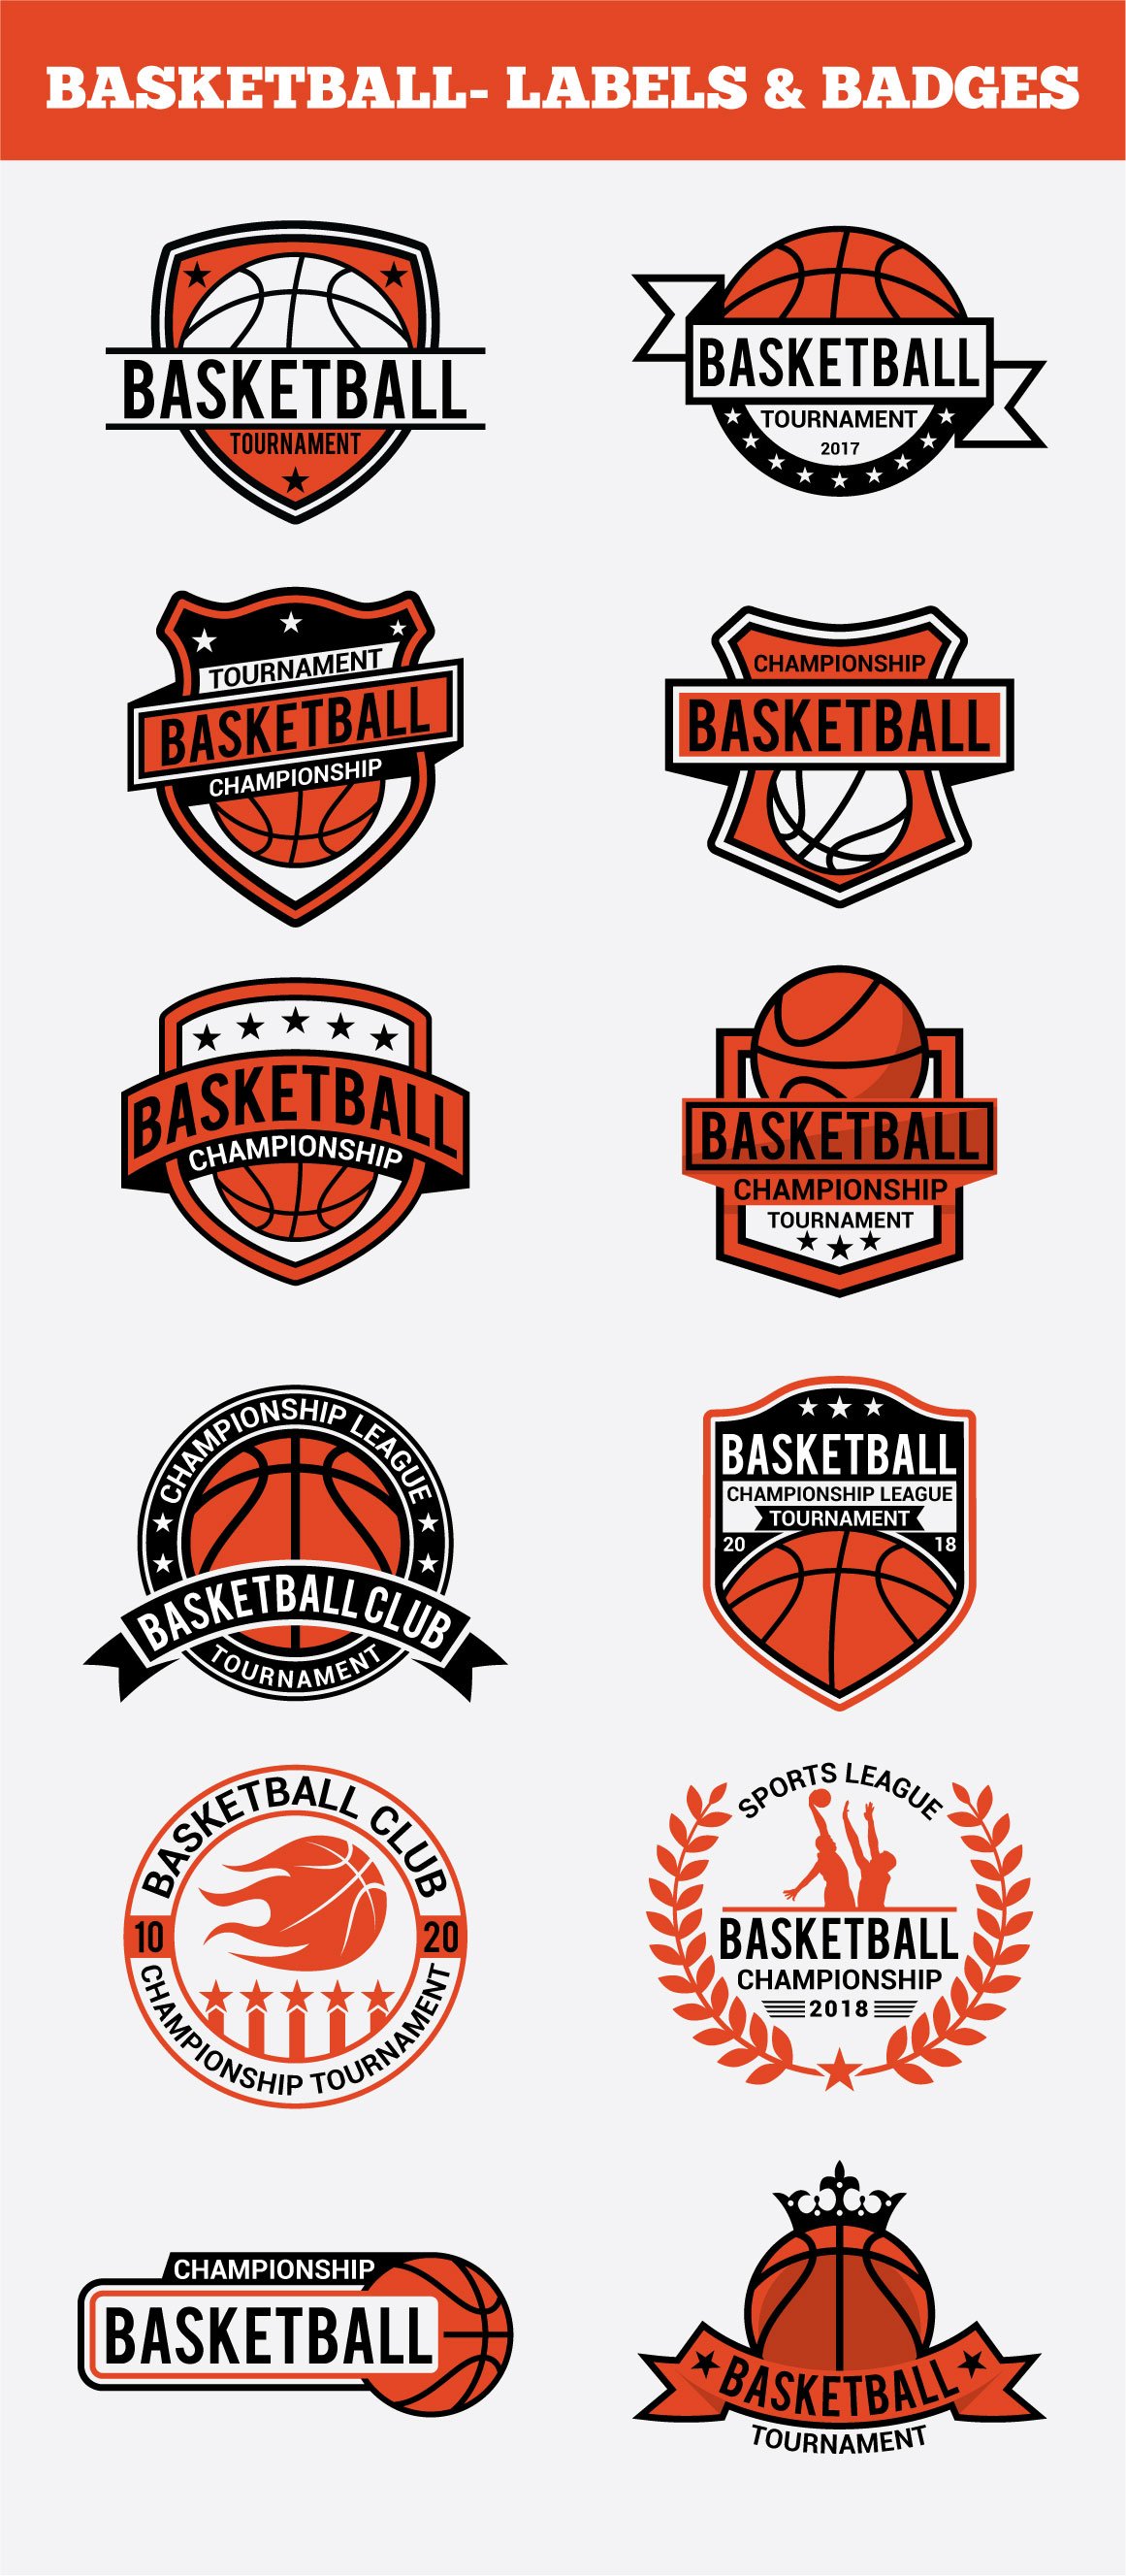 Red basketball logos in different shapes.